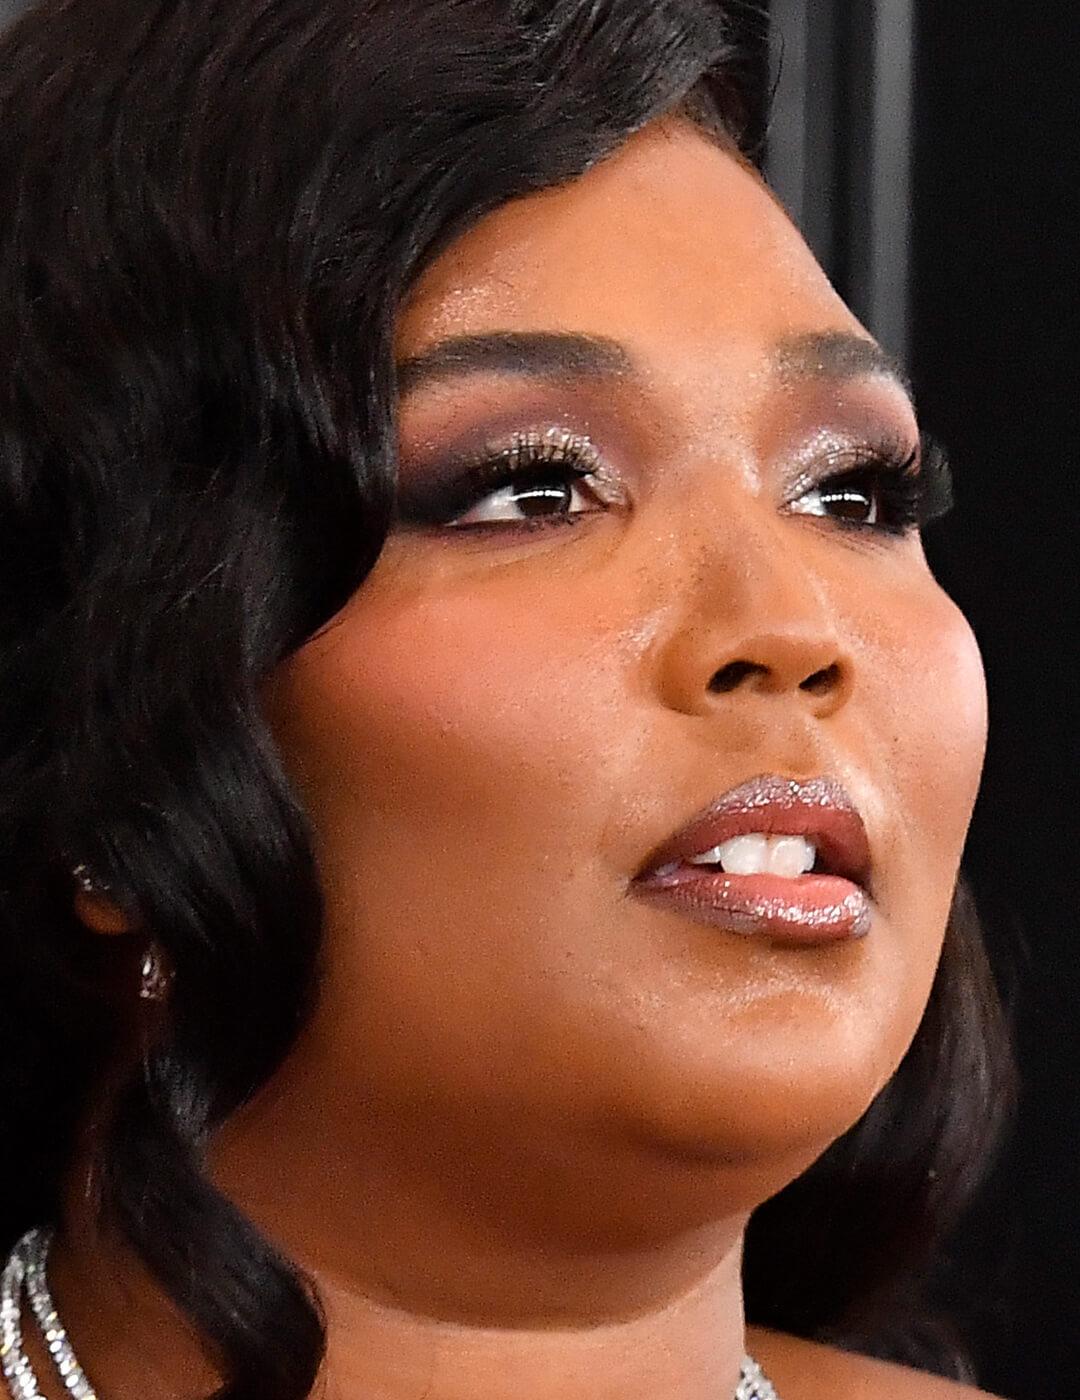 Lizzo rocking a glam smoky eyeshadow makeup look with fluttery false lashes